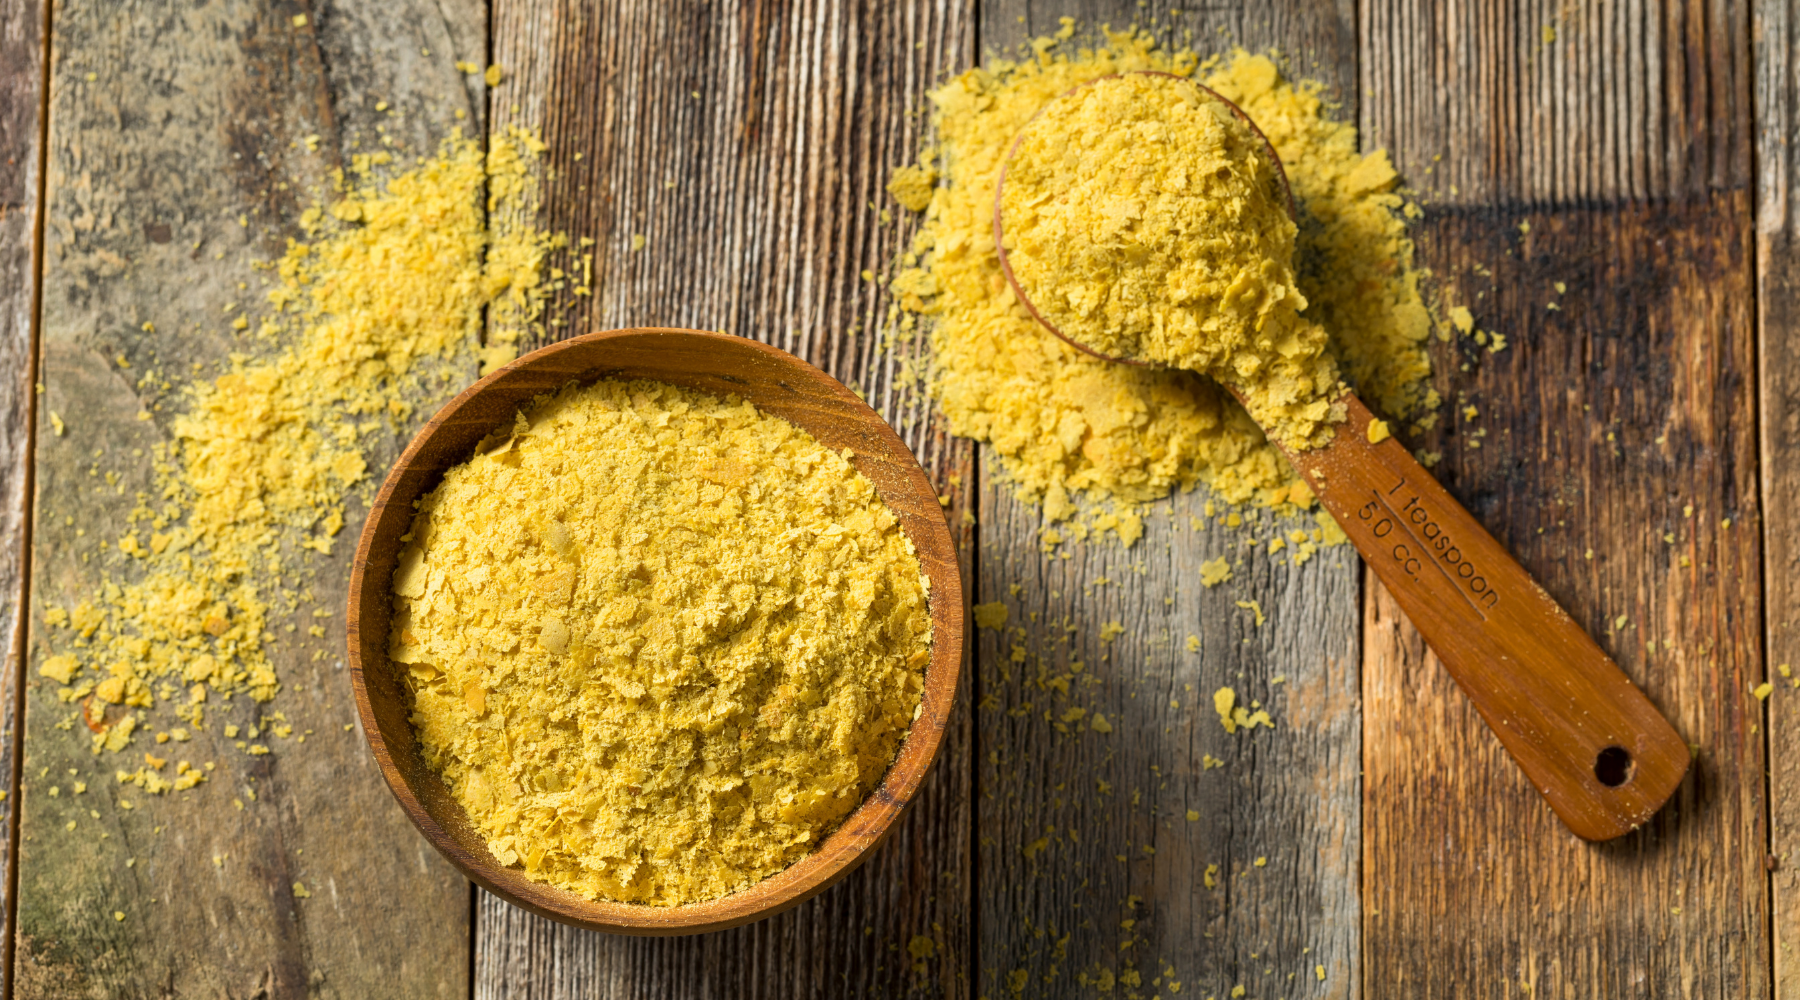 8 Ways to Use Nutritional Yeast, Taking a Dish From Ordinary to Extraordinary!